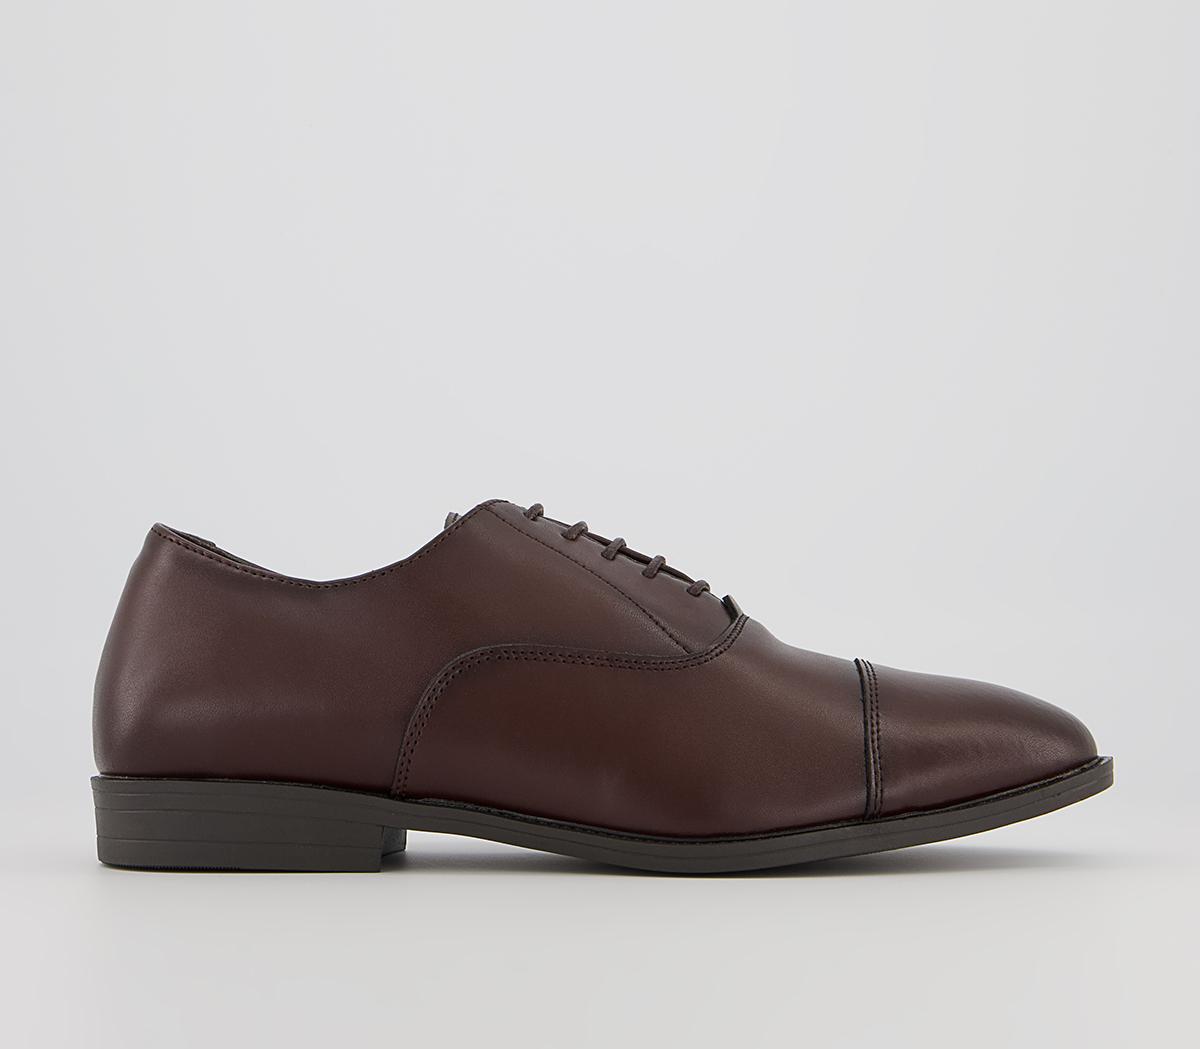 OfficeMemo 2 Plain Oxford ShoesBrown Leather